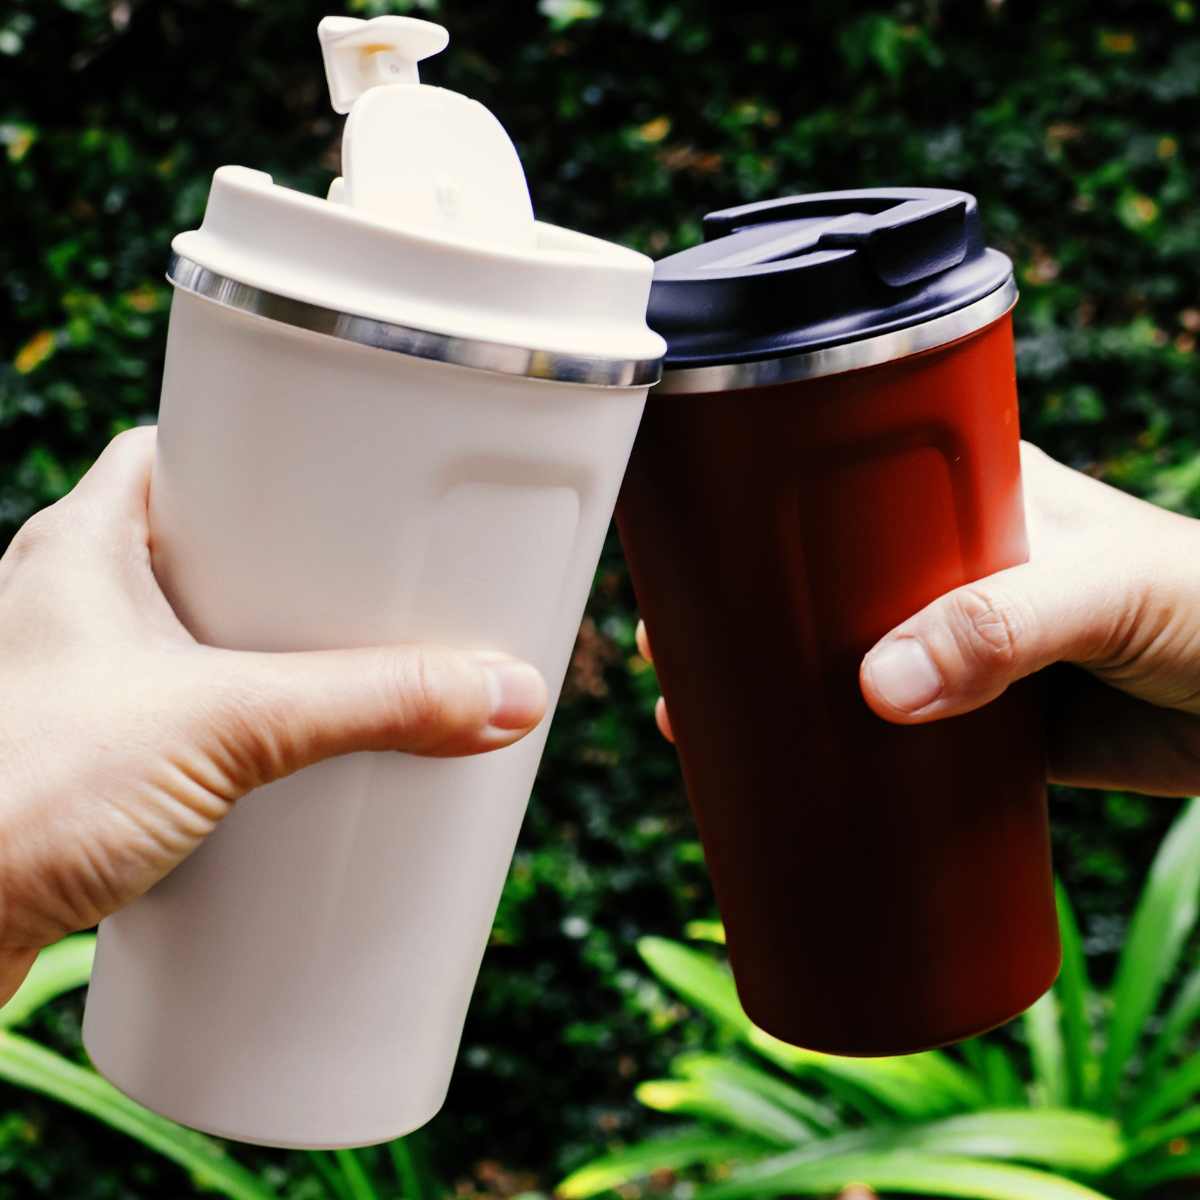 Two hands clinking thermal mugs of coffee.